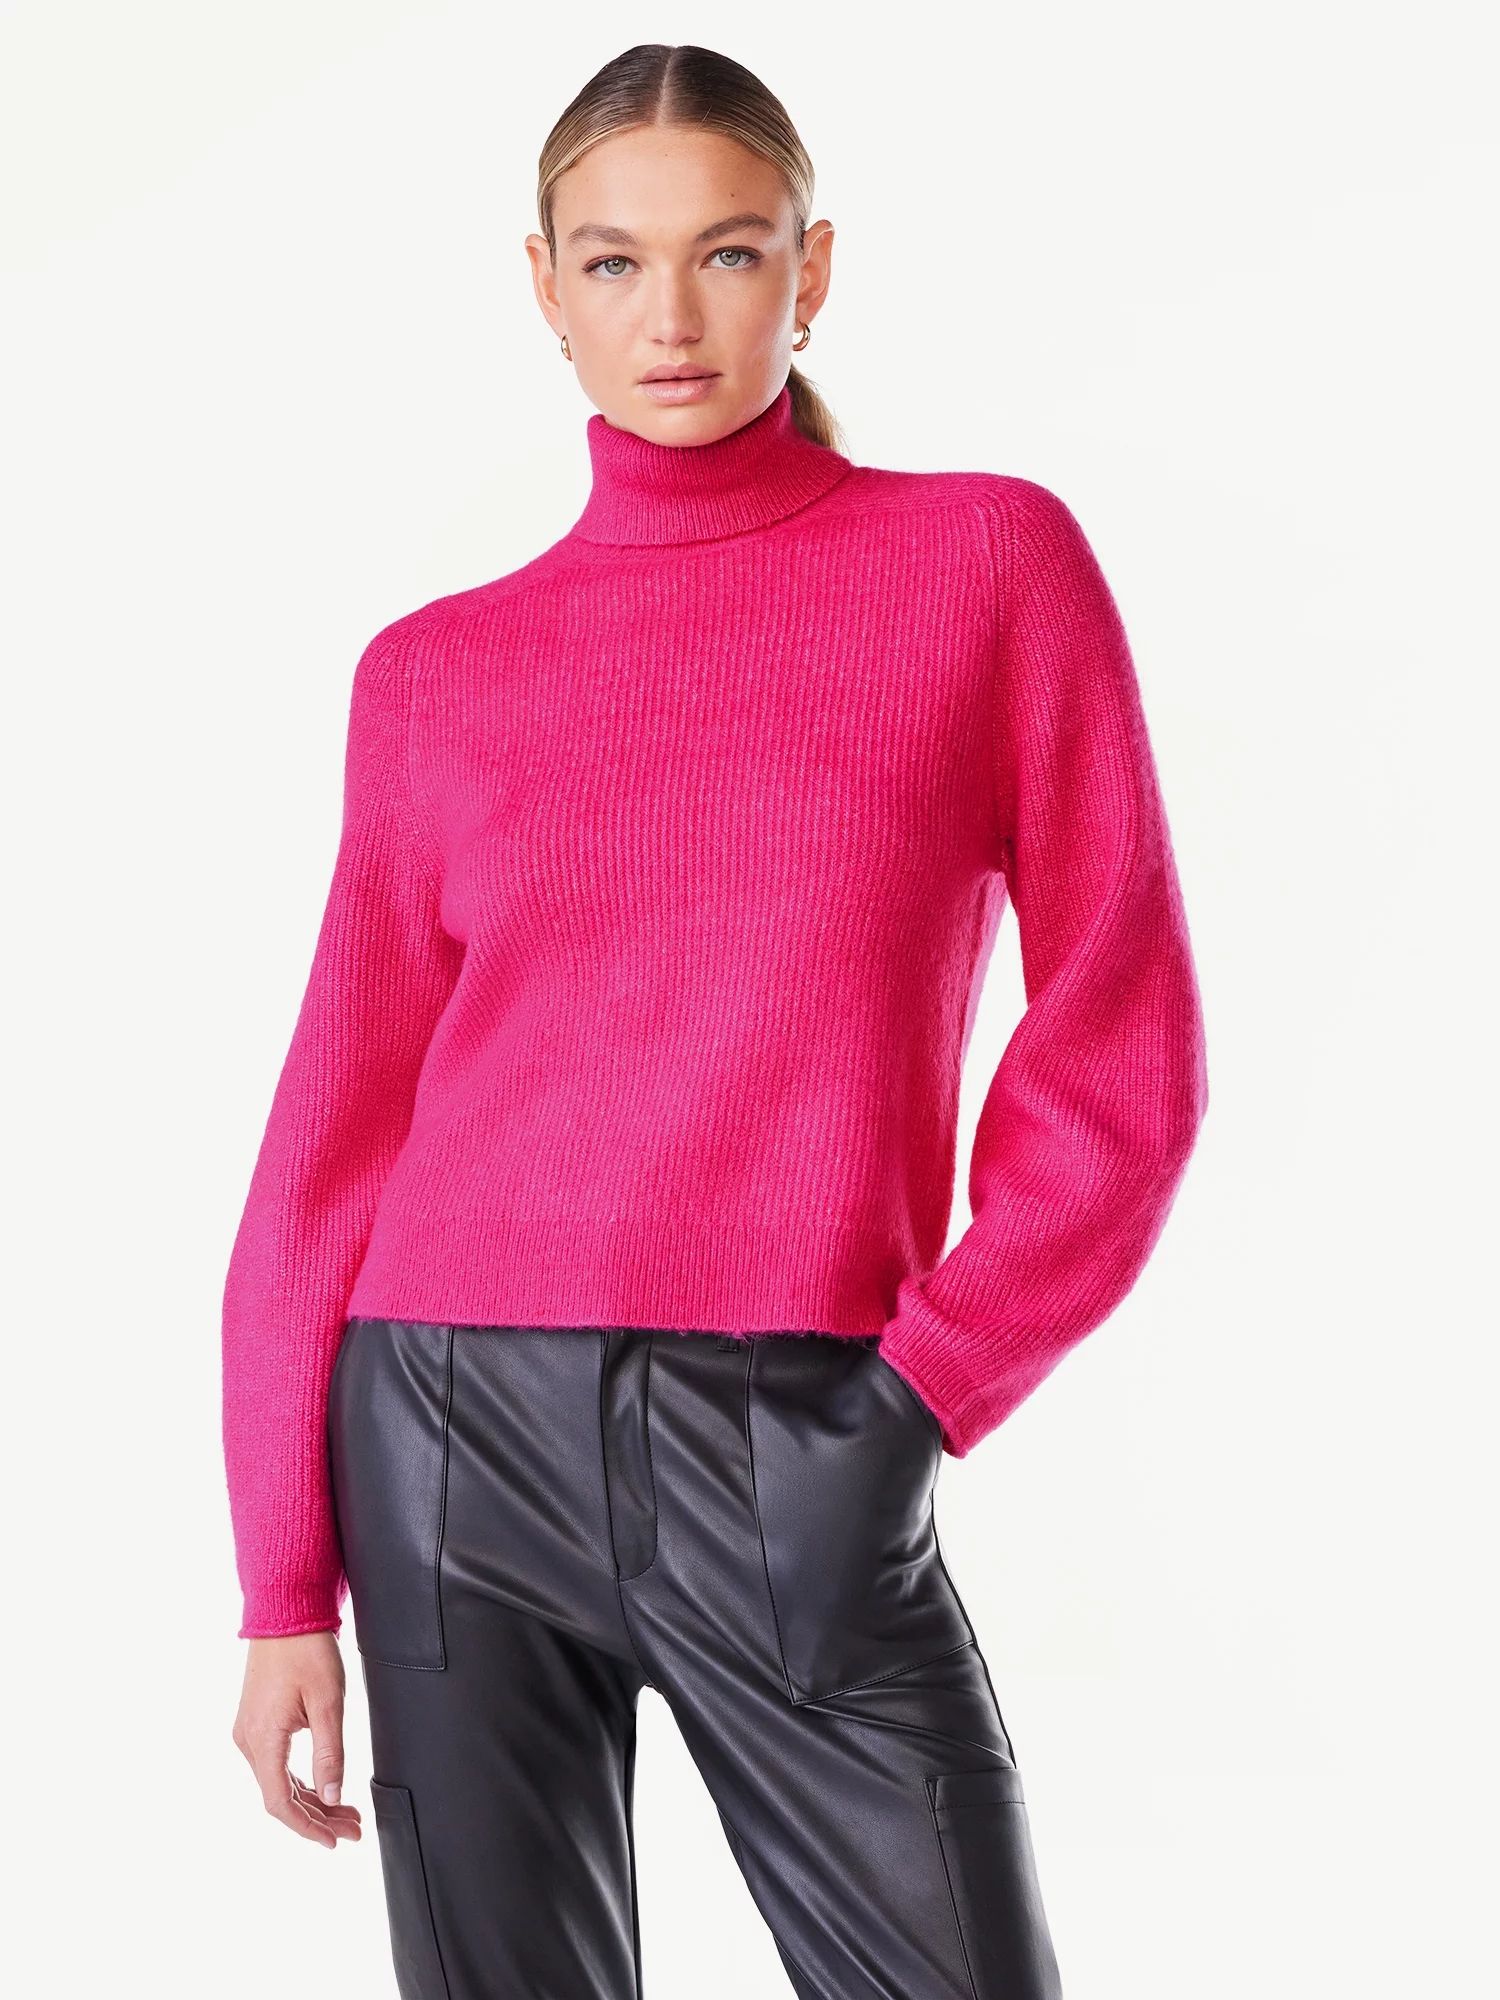 Scoop Women's Ribbed Oversized Turtleneck Sweater with Long Sleeves, Sizes XS-XXL | Walmart (US)